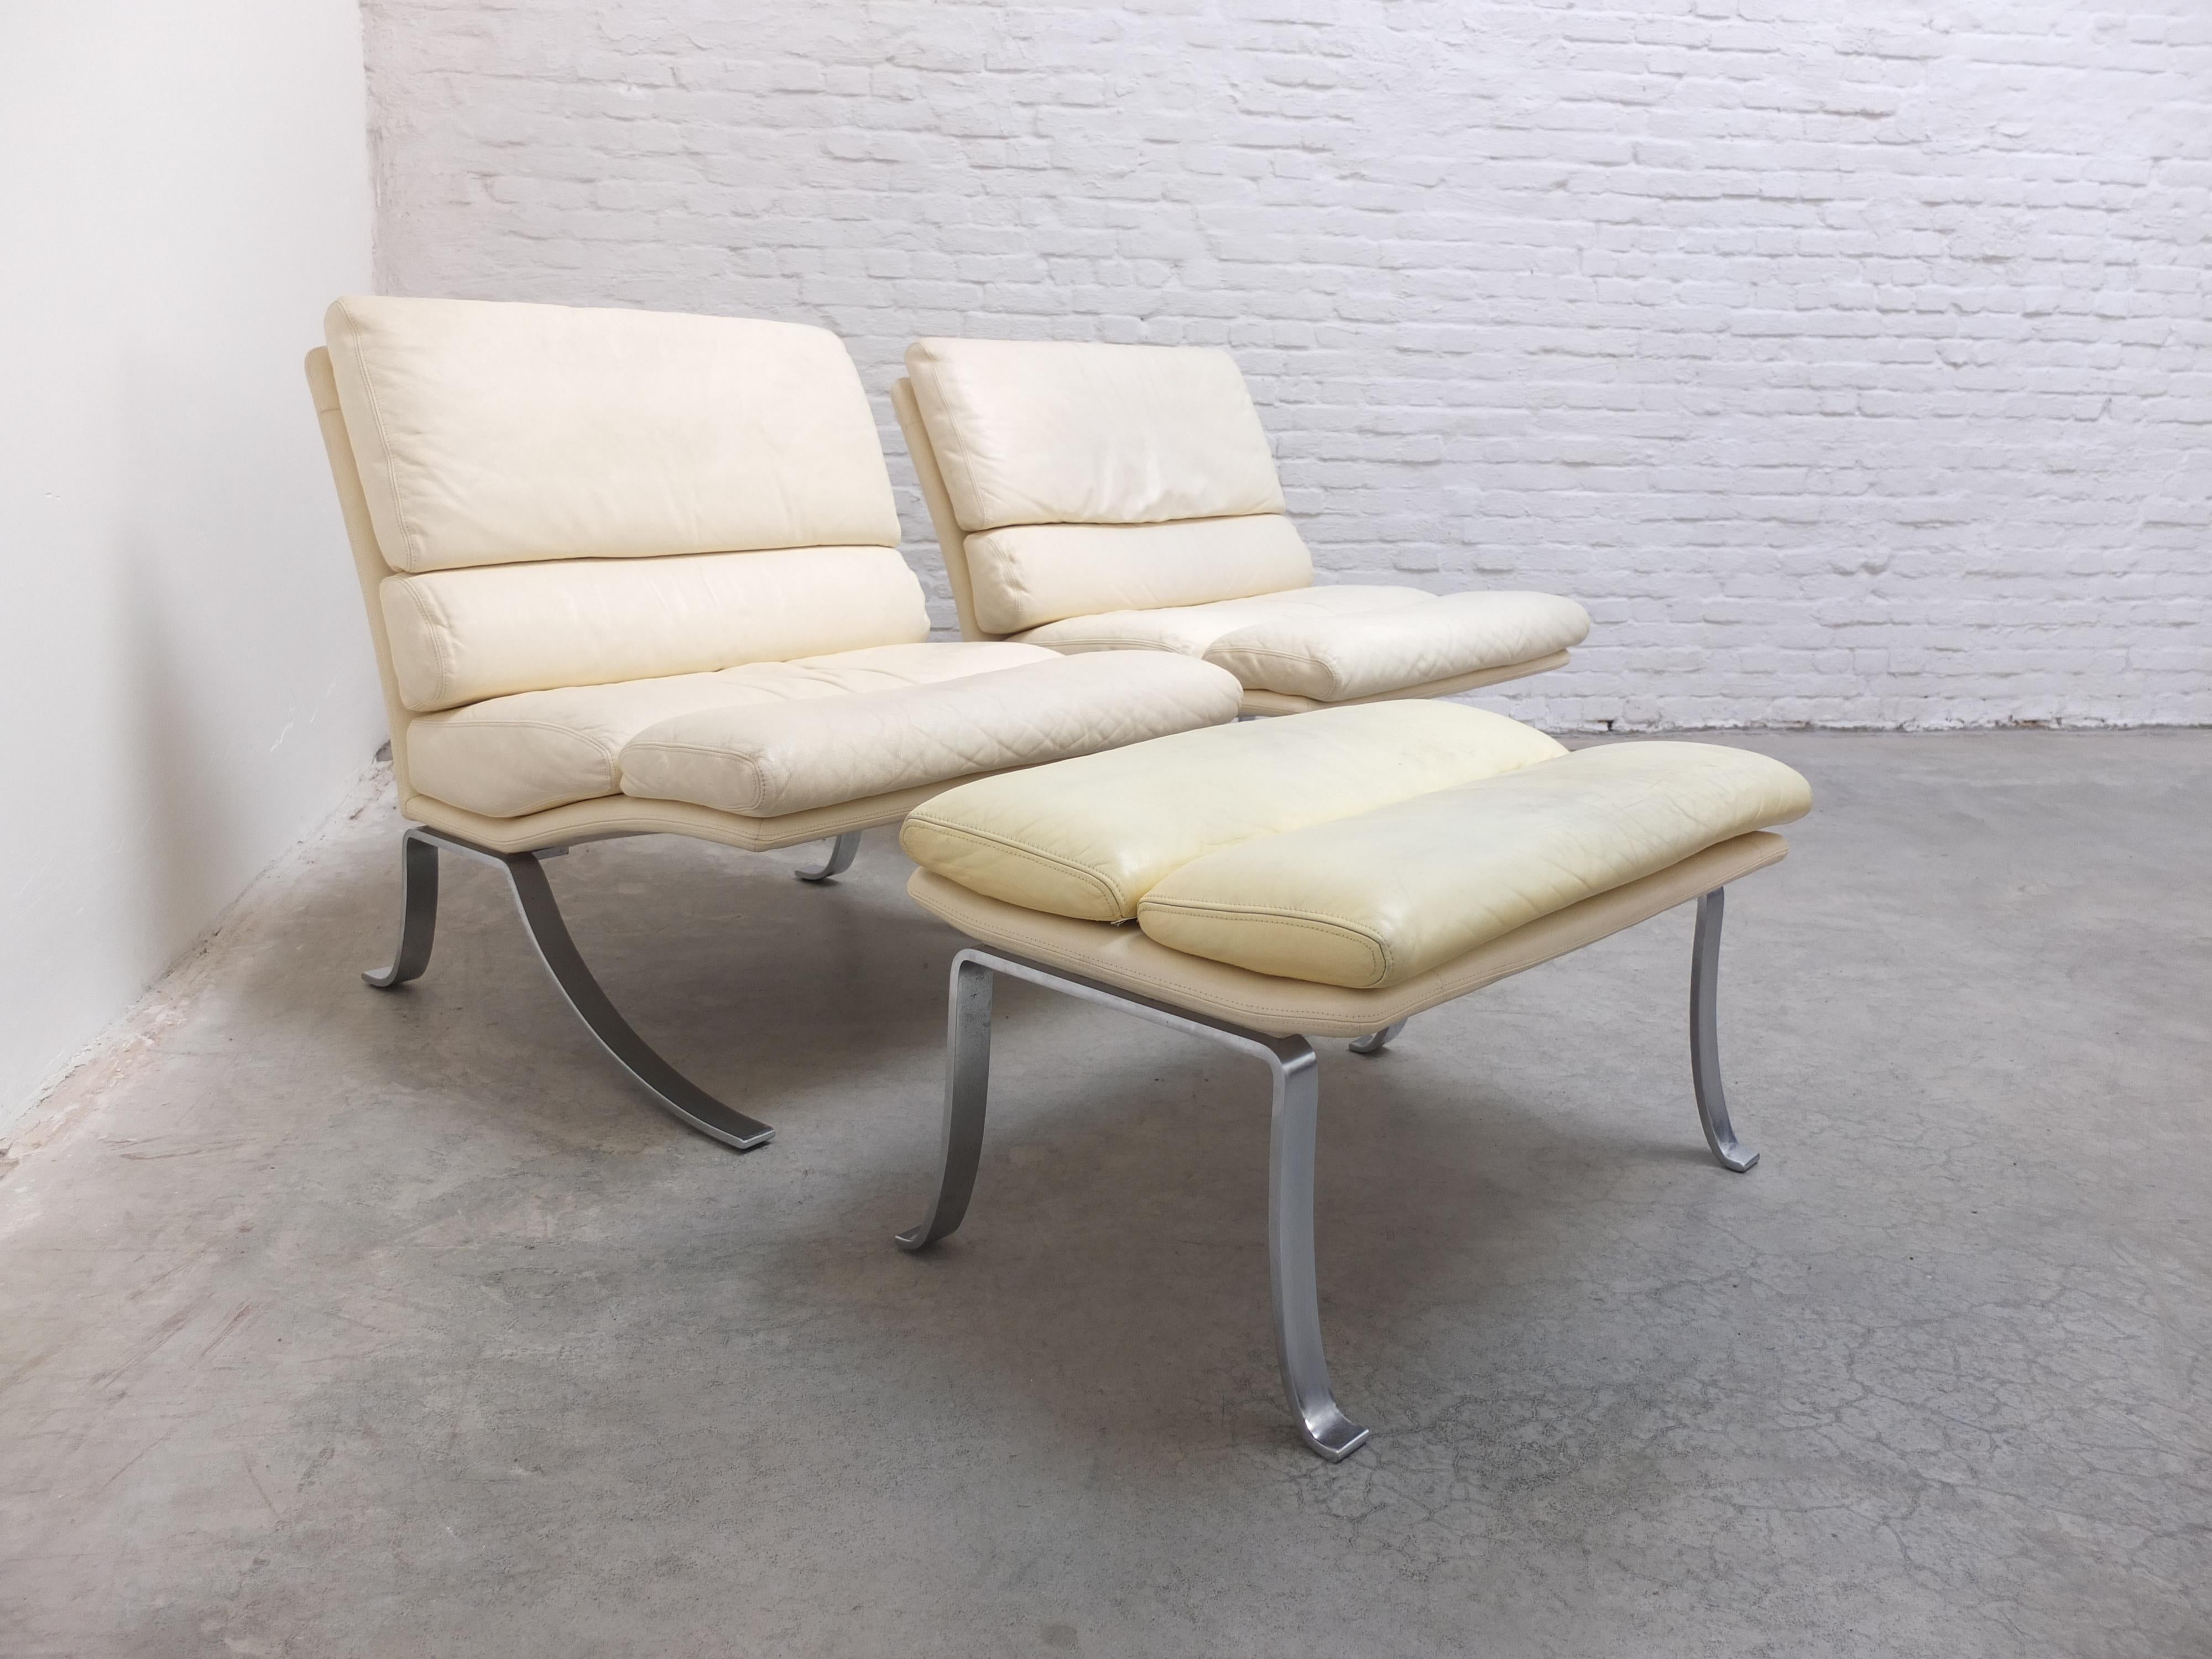 Rare Pair of Belgian Modernist Lounge Chairs with Ottoman by Durlet, 1970s 1